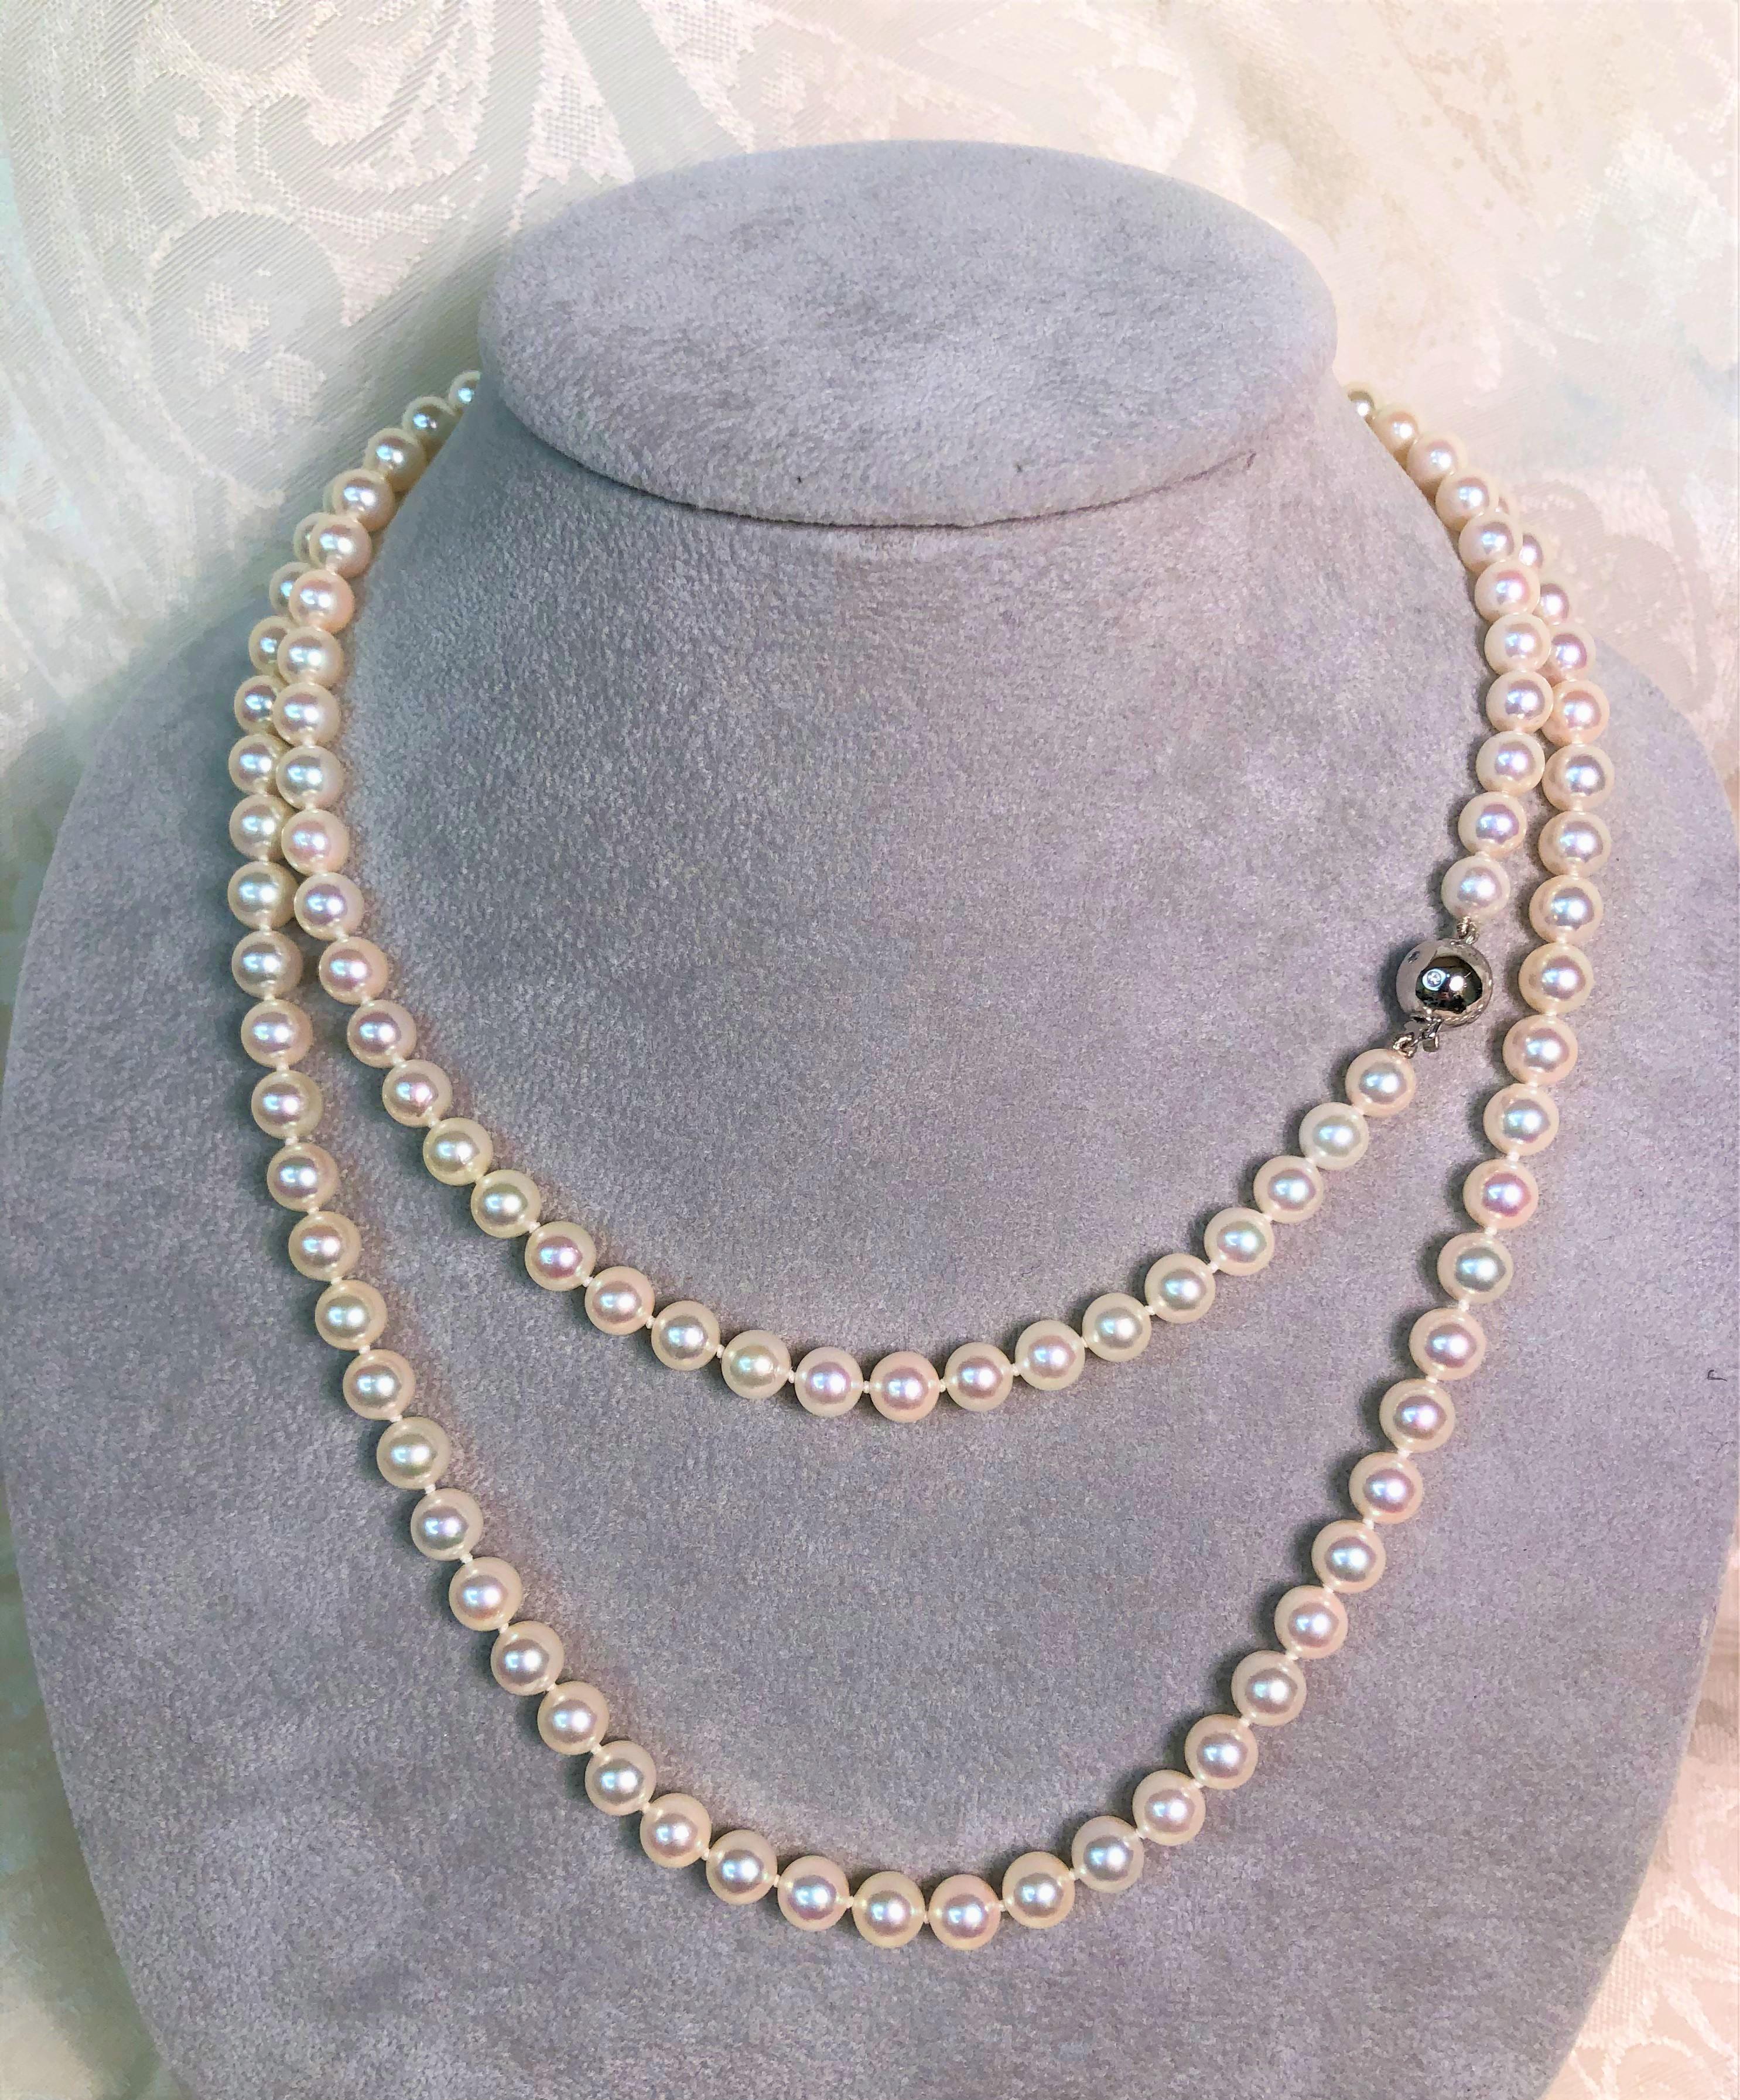 From designer Tasaki- these beautiful pearls can be worn long or doubled for a different look.  Perfect size for everyday!!
126 white Akoya pearls, each 6.5mm - 7mm round.  Bright luster.  Knotted.  Beautiful!!
18K white gold ball clasp with